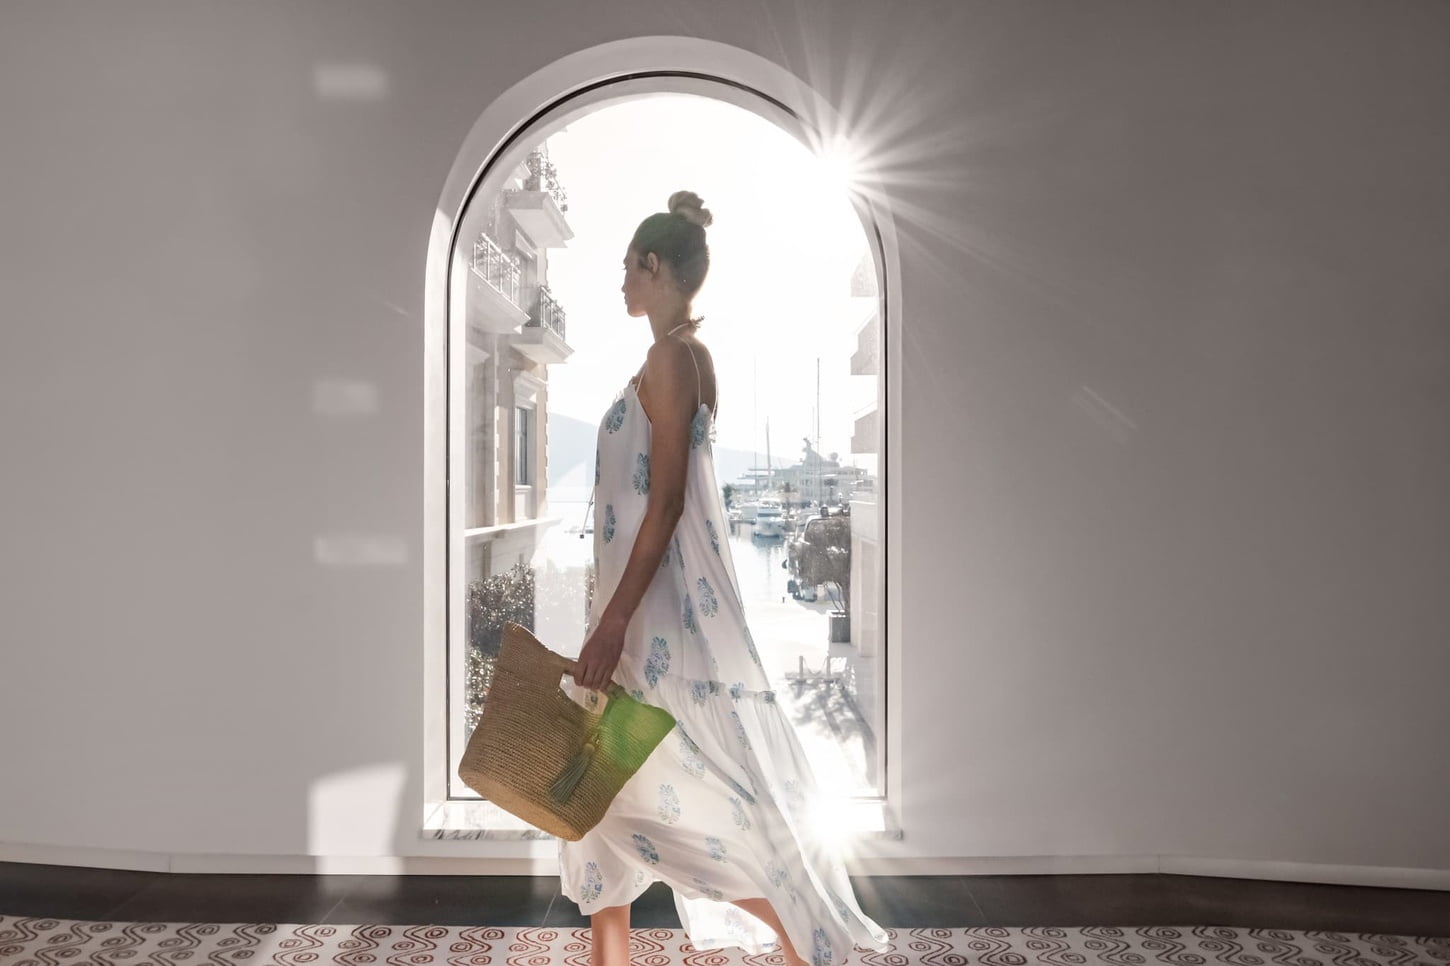 A woman in a flowing white dress with blue patterns stands in a sunlit arched doorway holding a straw tote bag.